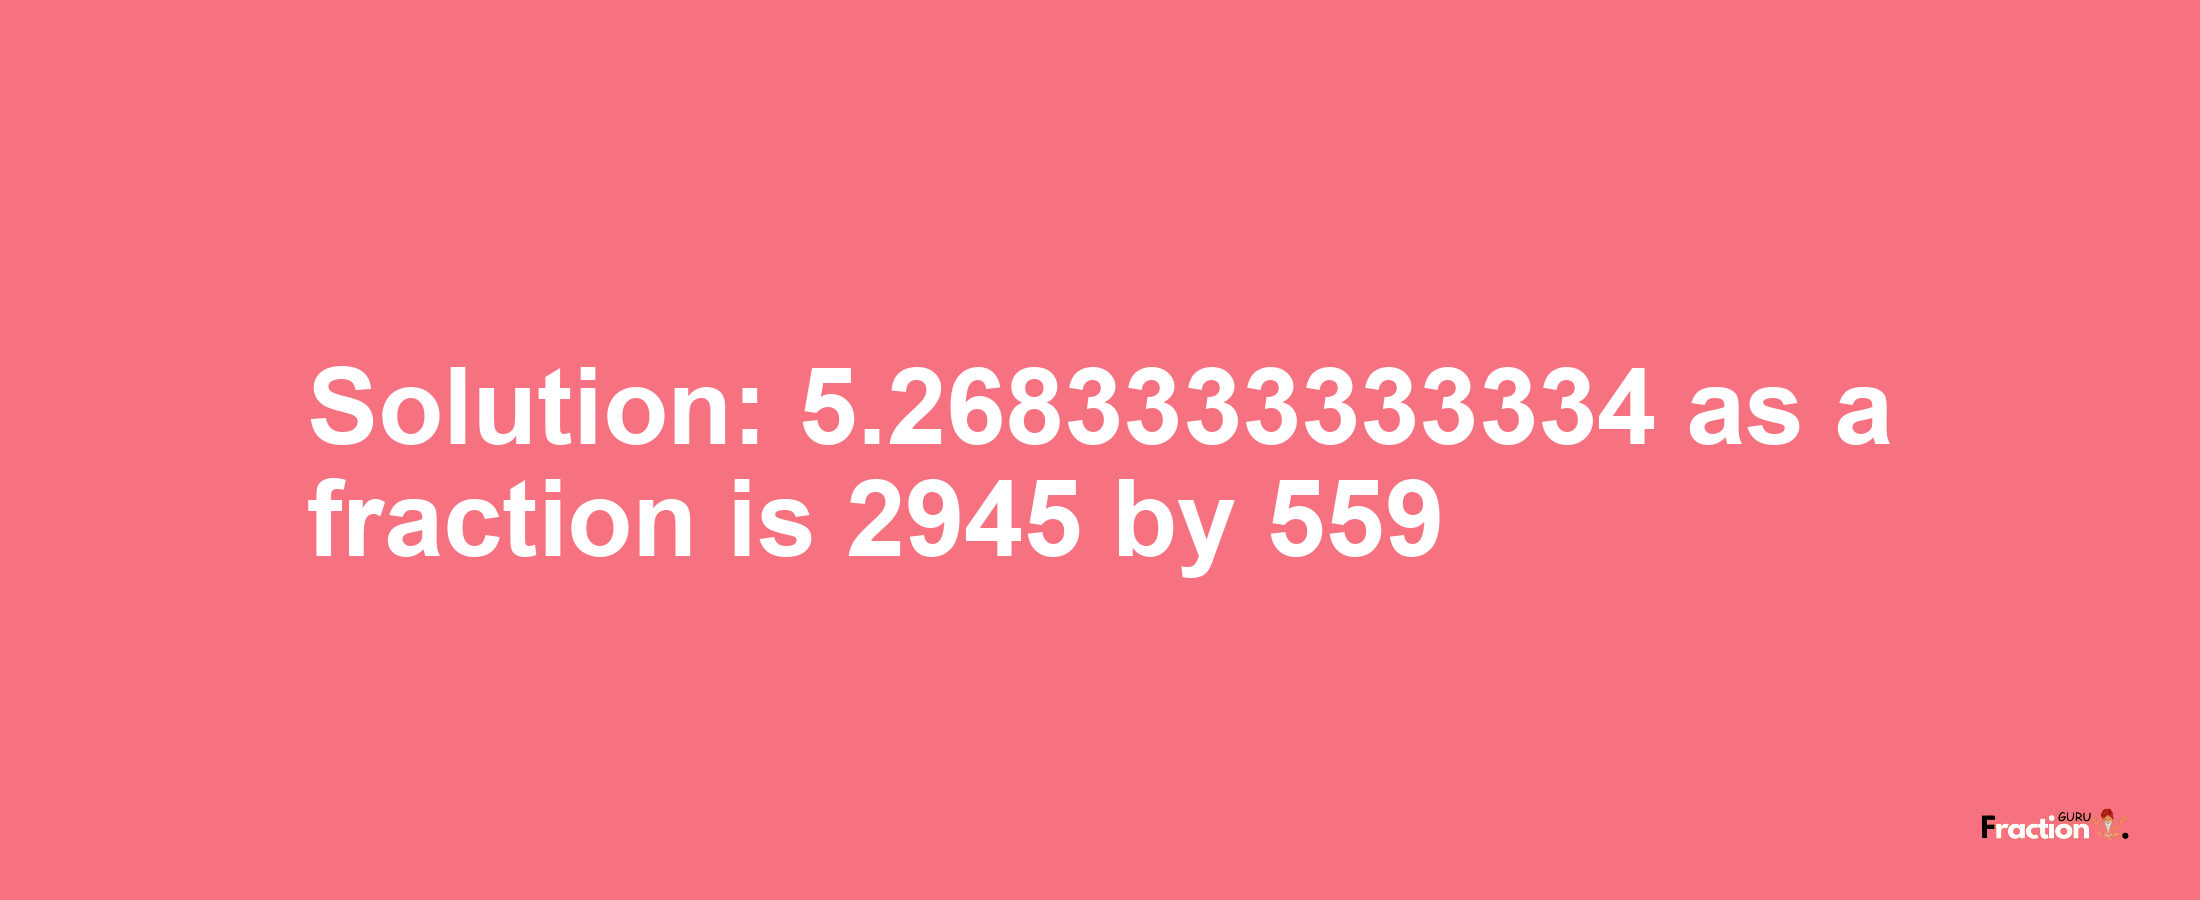 Solution:5.2683333333334 as a fraction is 2945/559